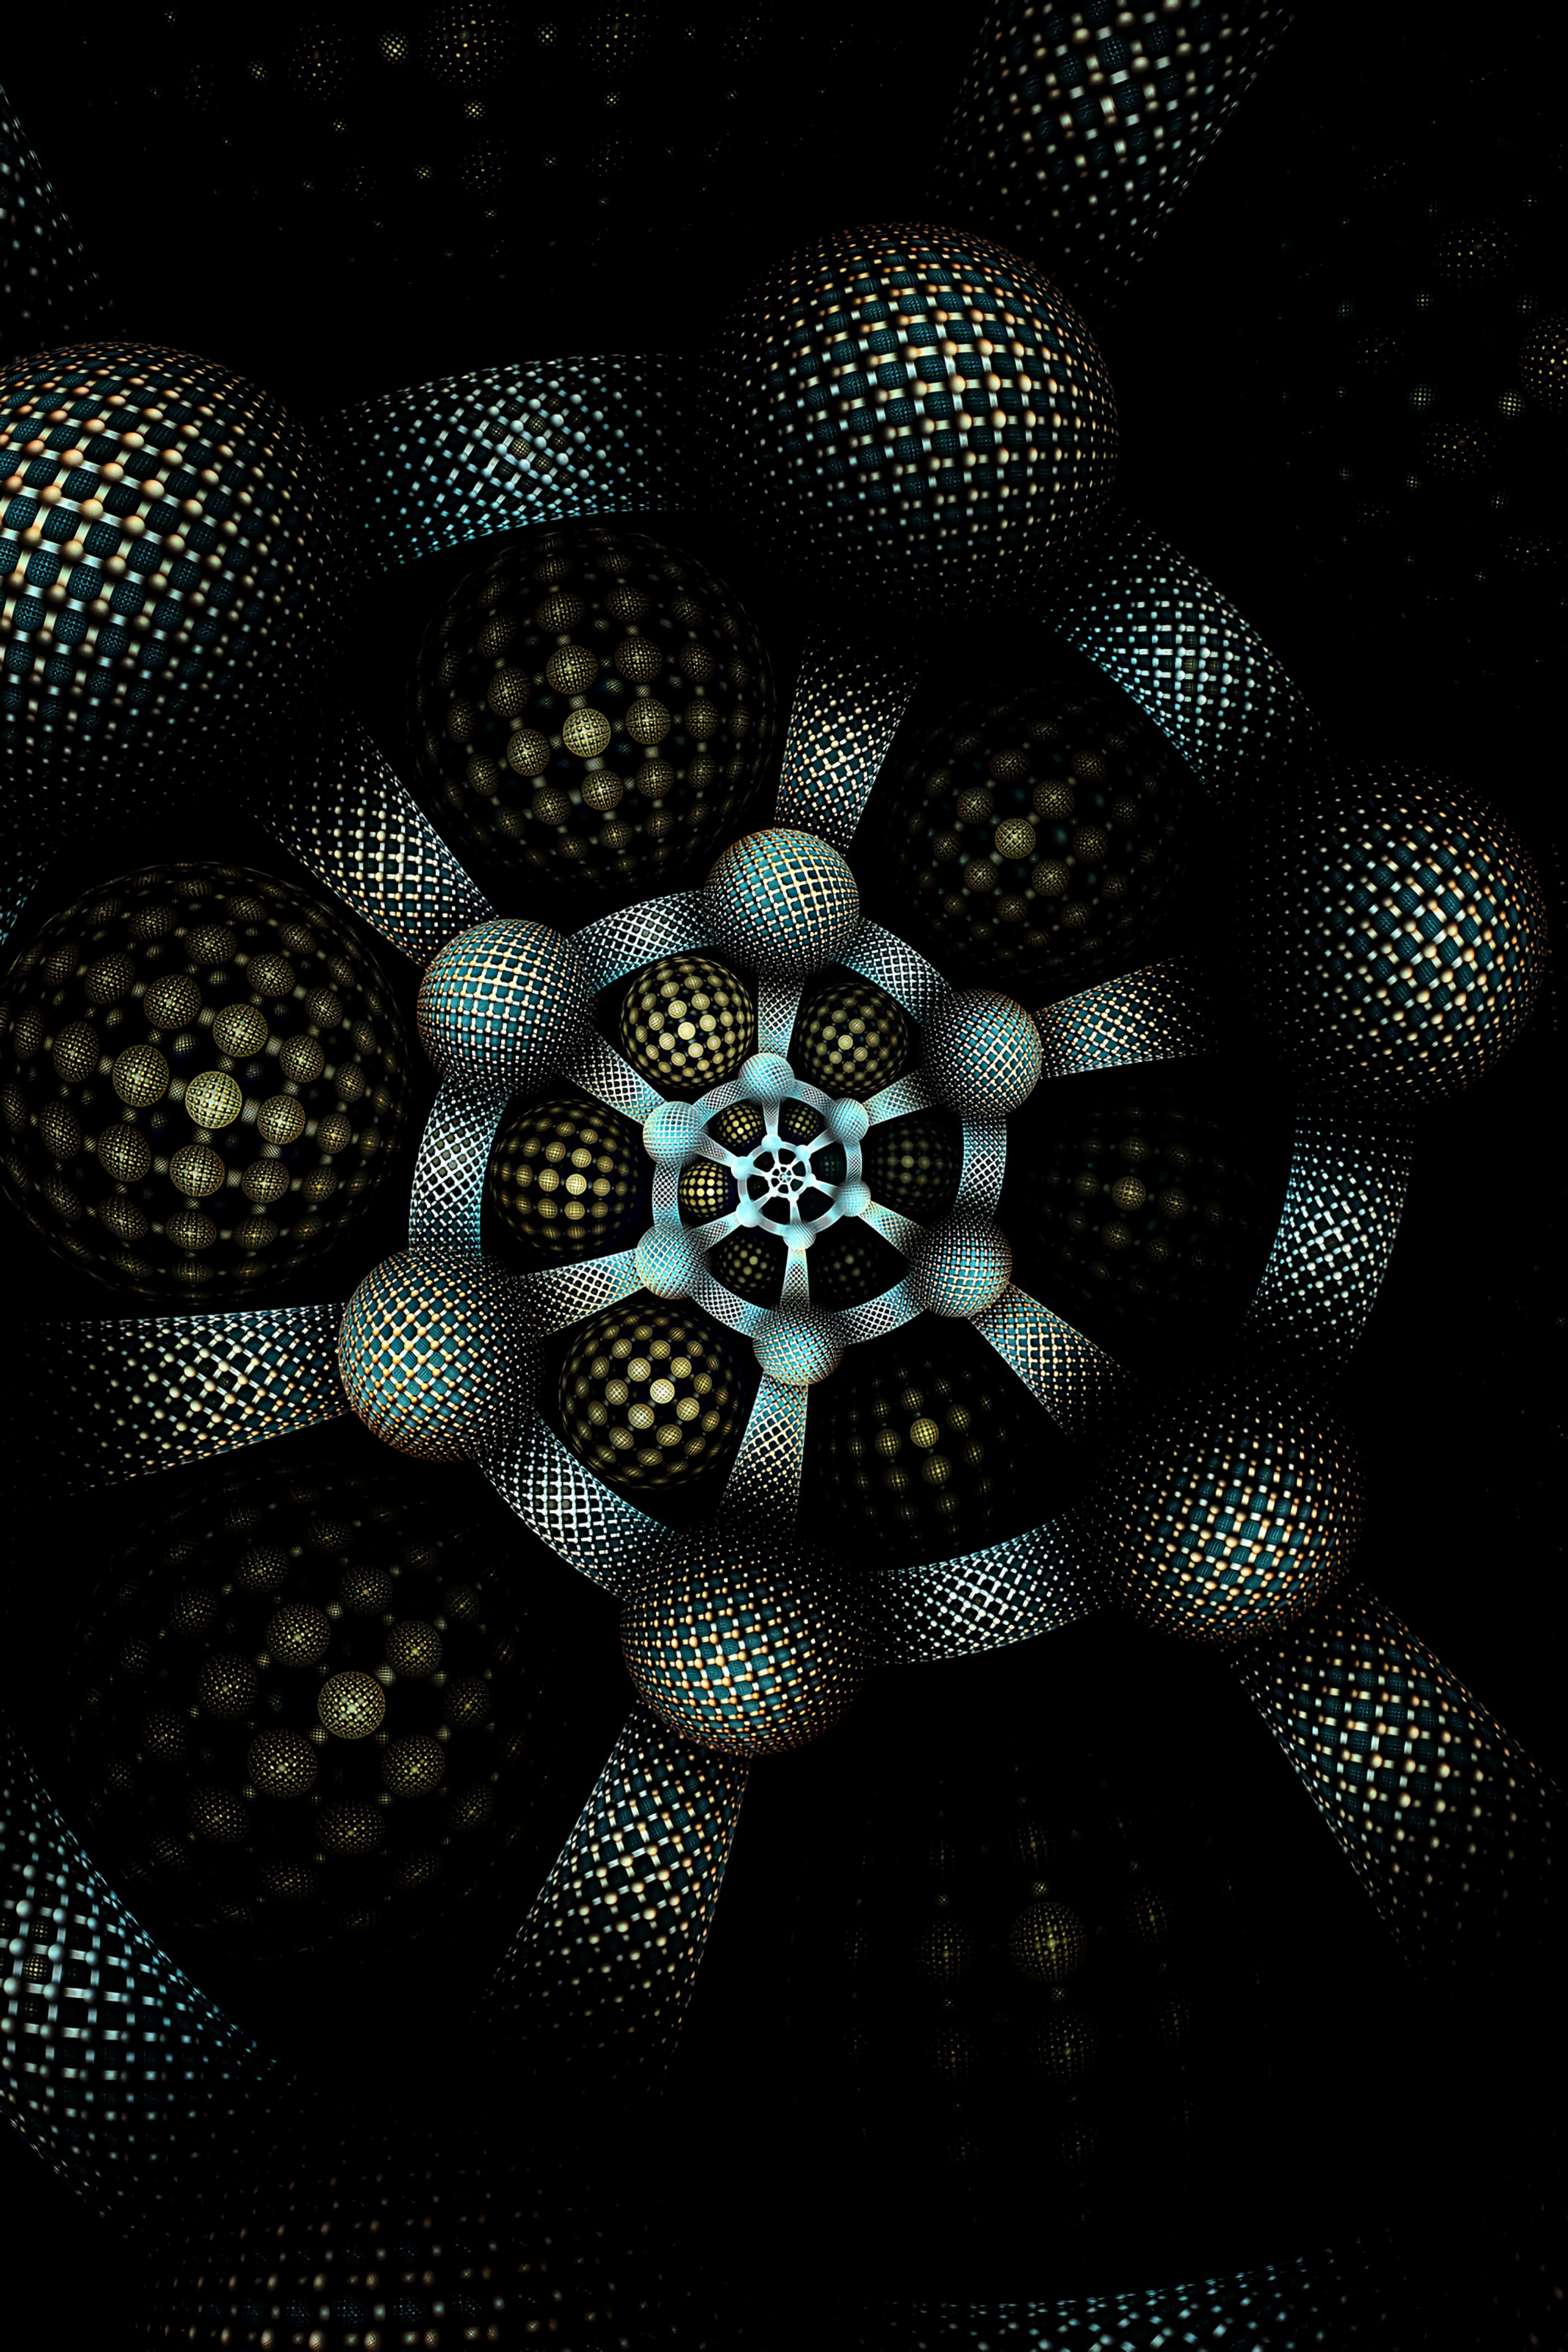 dark, form, circles, involute, abstract, pattern, fractal, swirling mobile wallpaper